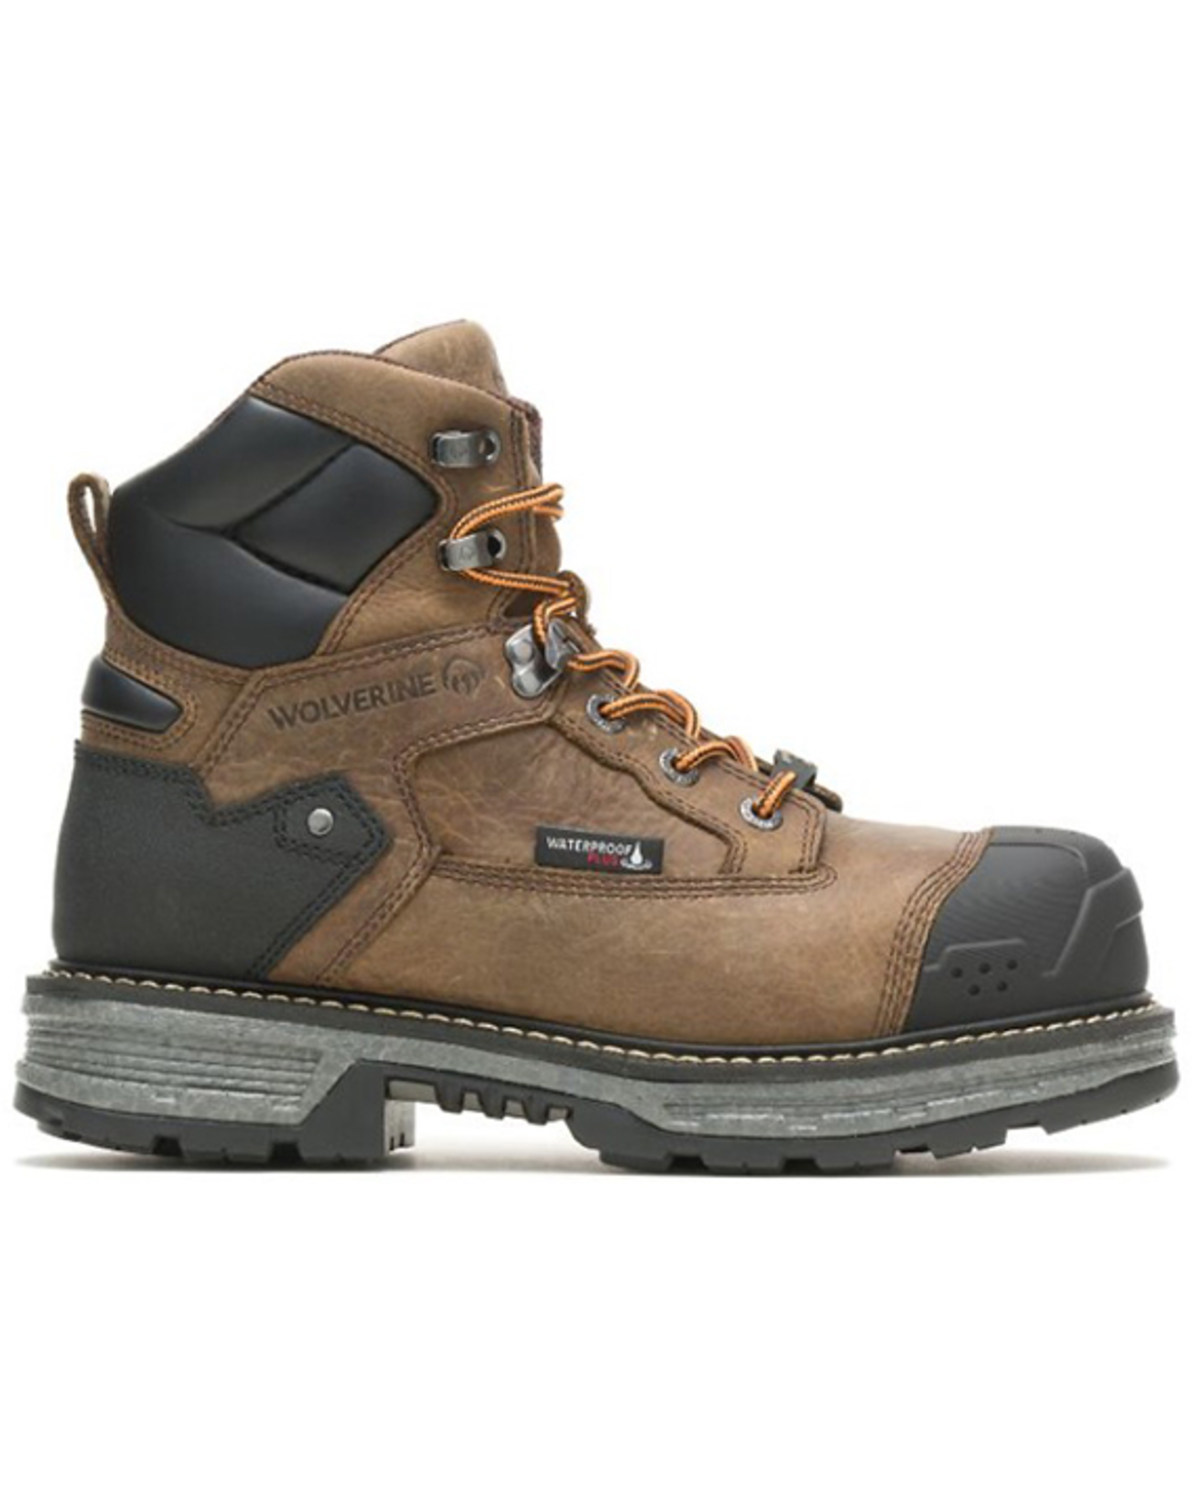 Wolverine Men's Hellcat UltraSpring Heavy Duty 6" Lace-Up Work Boots - Composite Toe